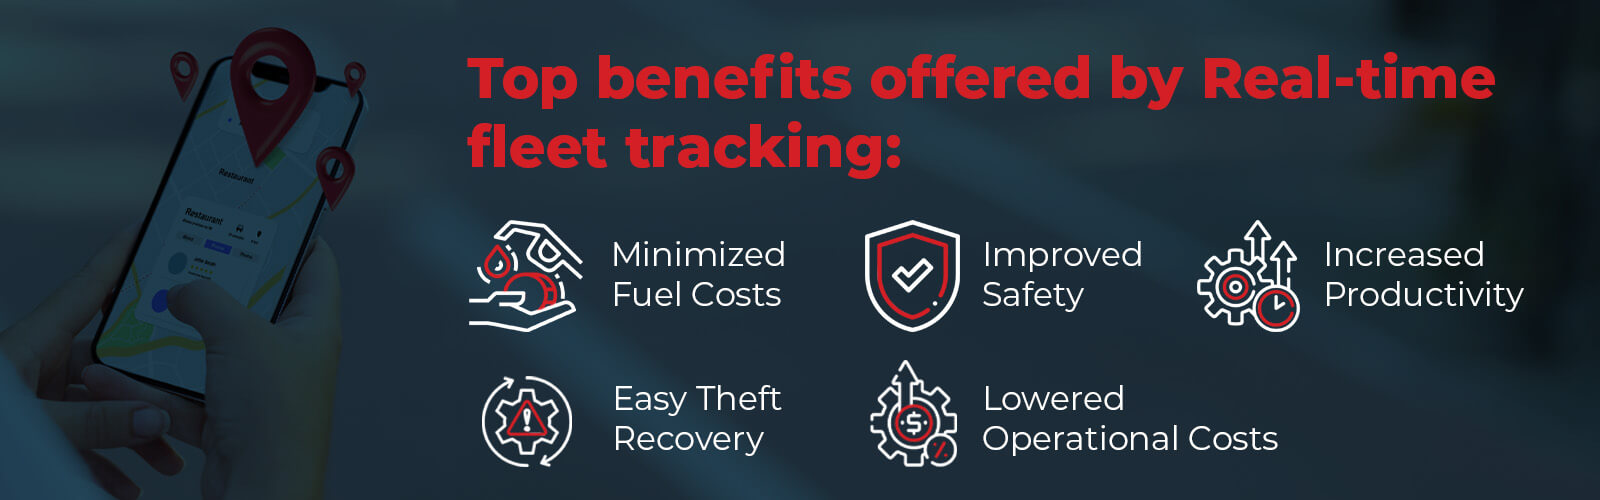 Benefits of real-time fleet tracking